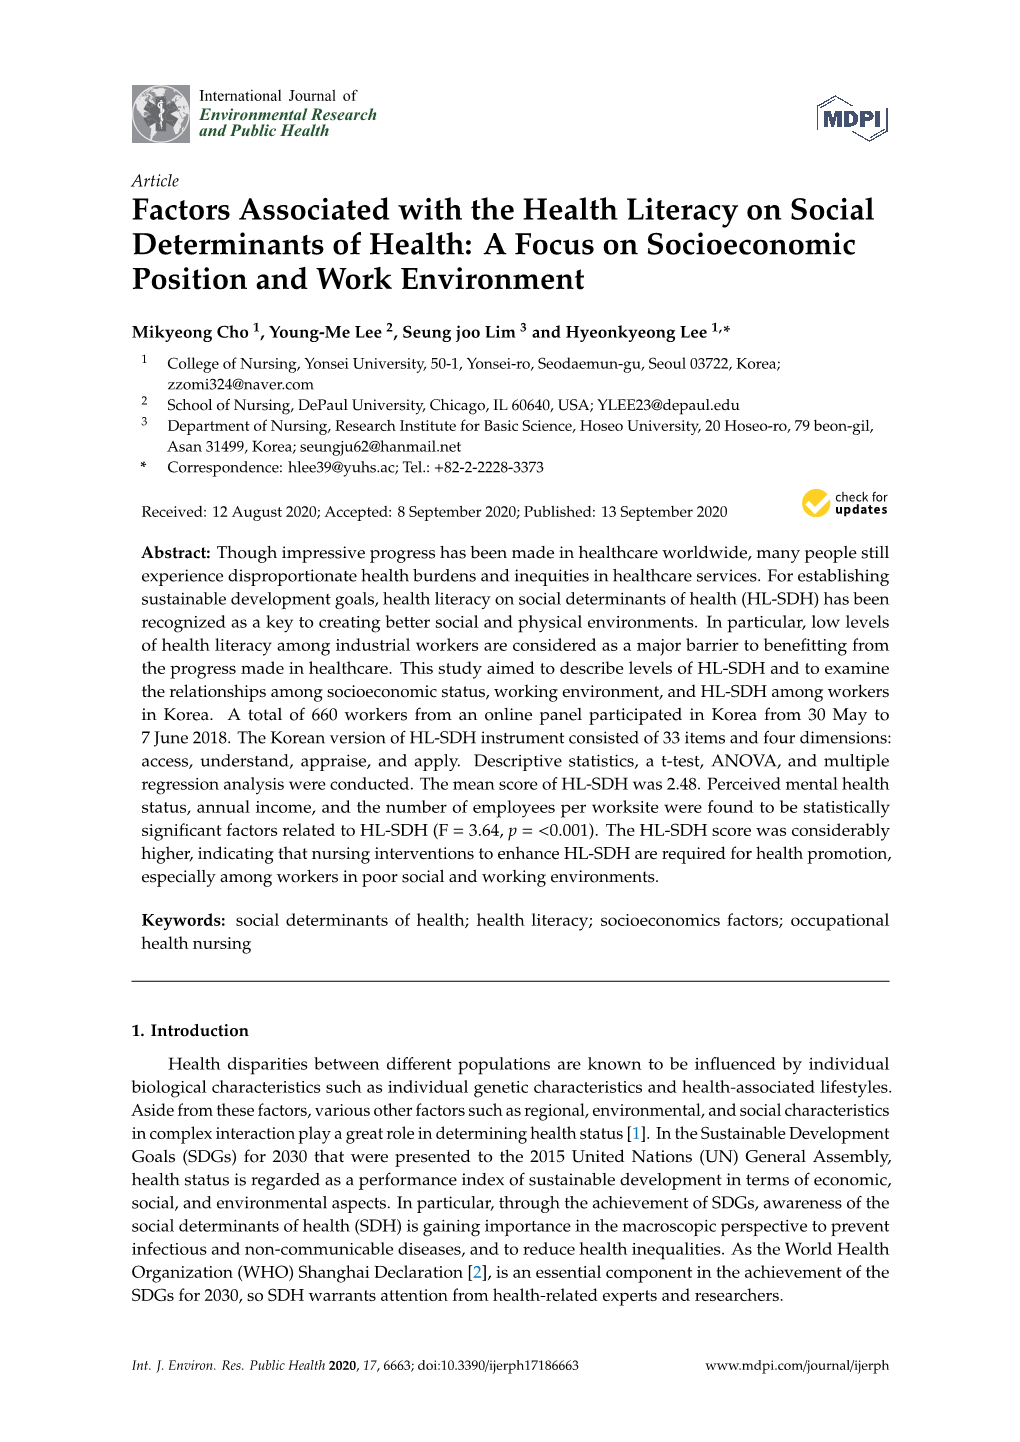 Factors Associated with the Health Literacy on Social Determinants of Health: a Focus on Socioeconomic Position and Work Environment